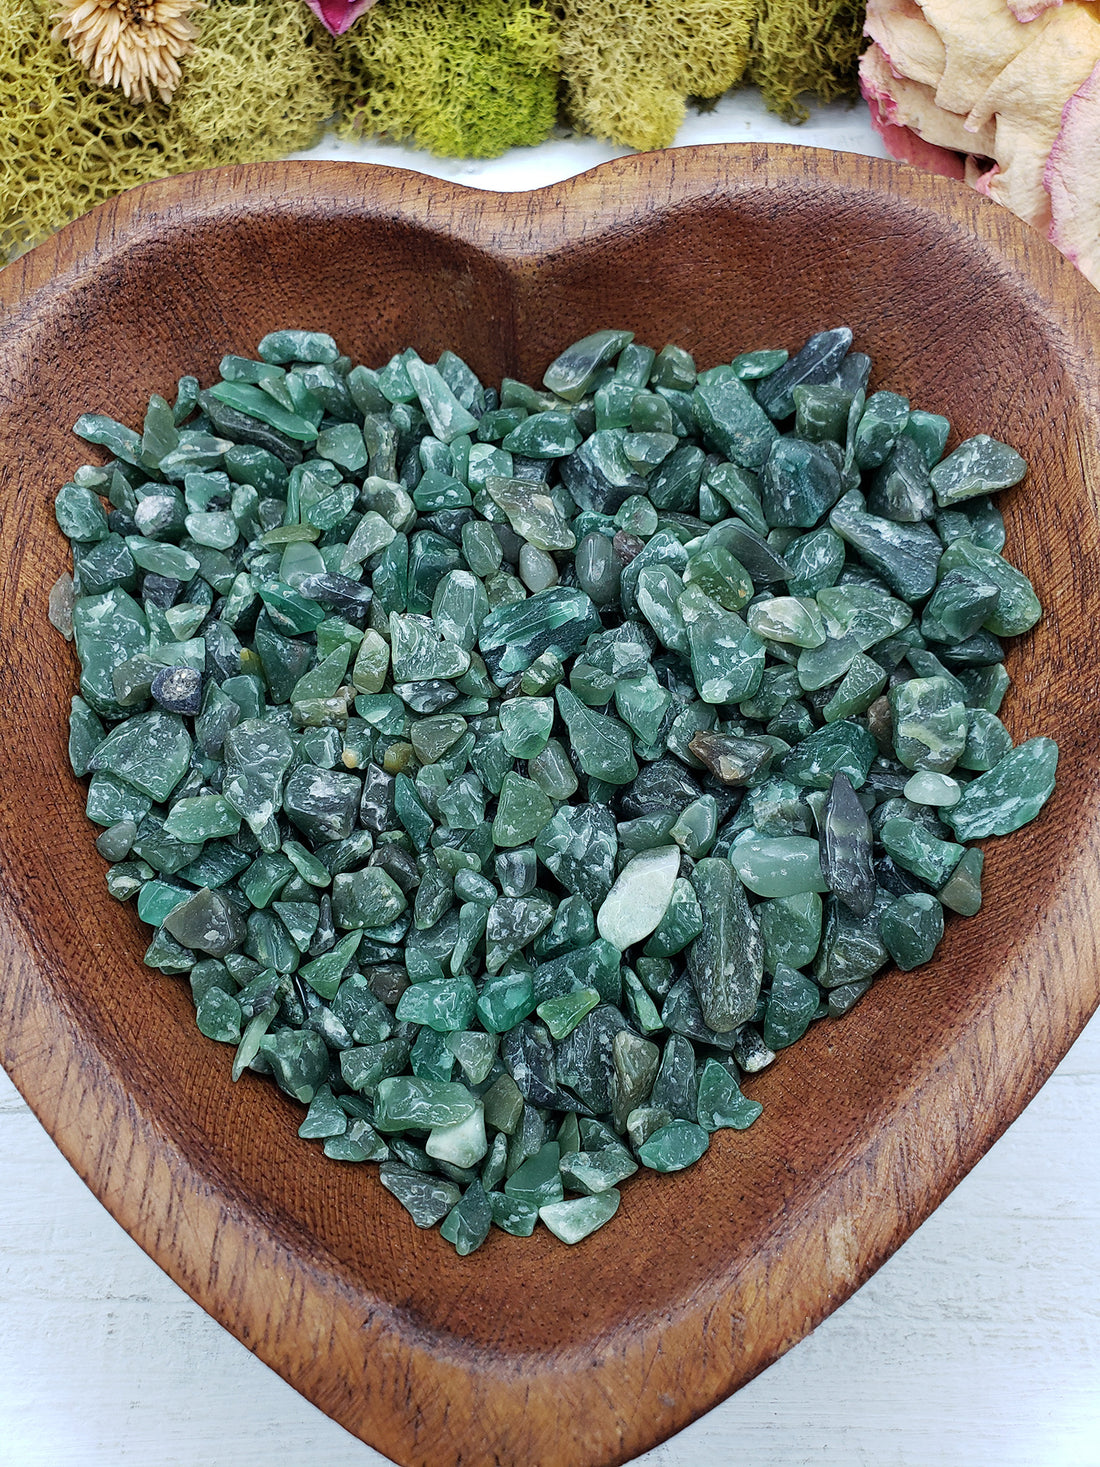 Eight ounces of green aventurine chips in a bowl